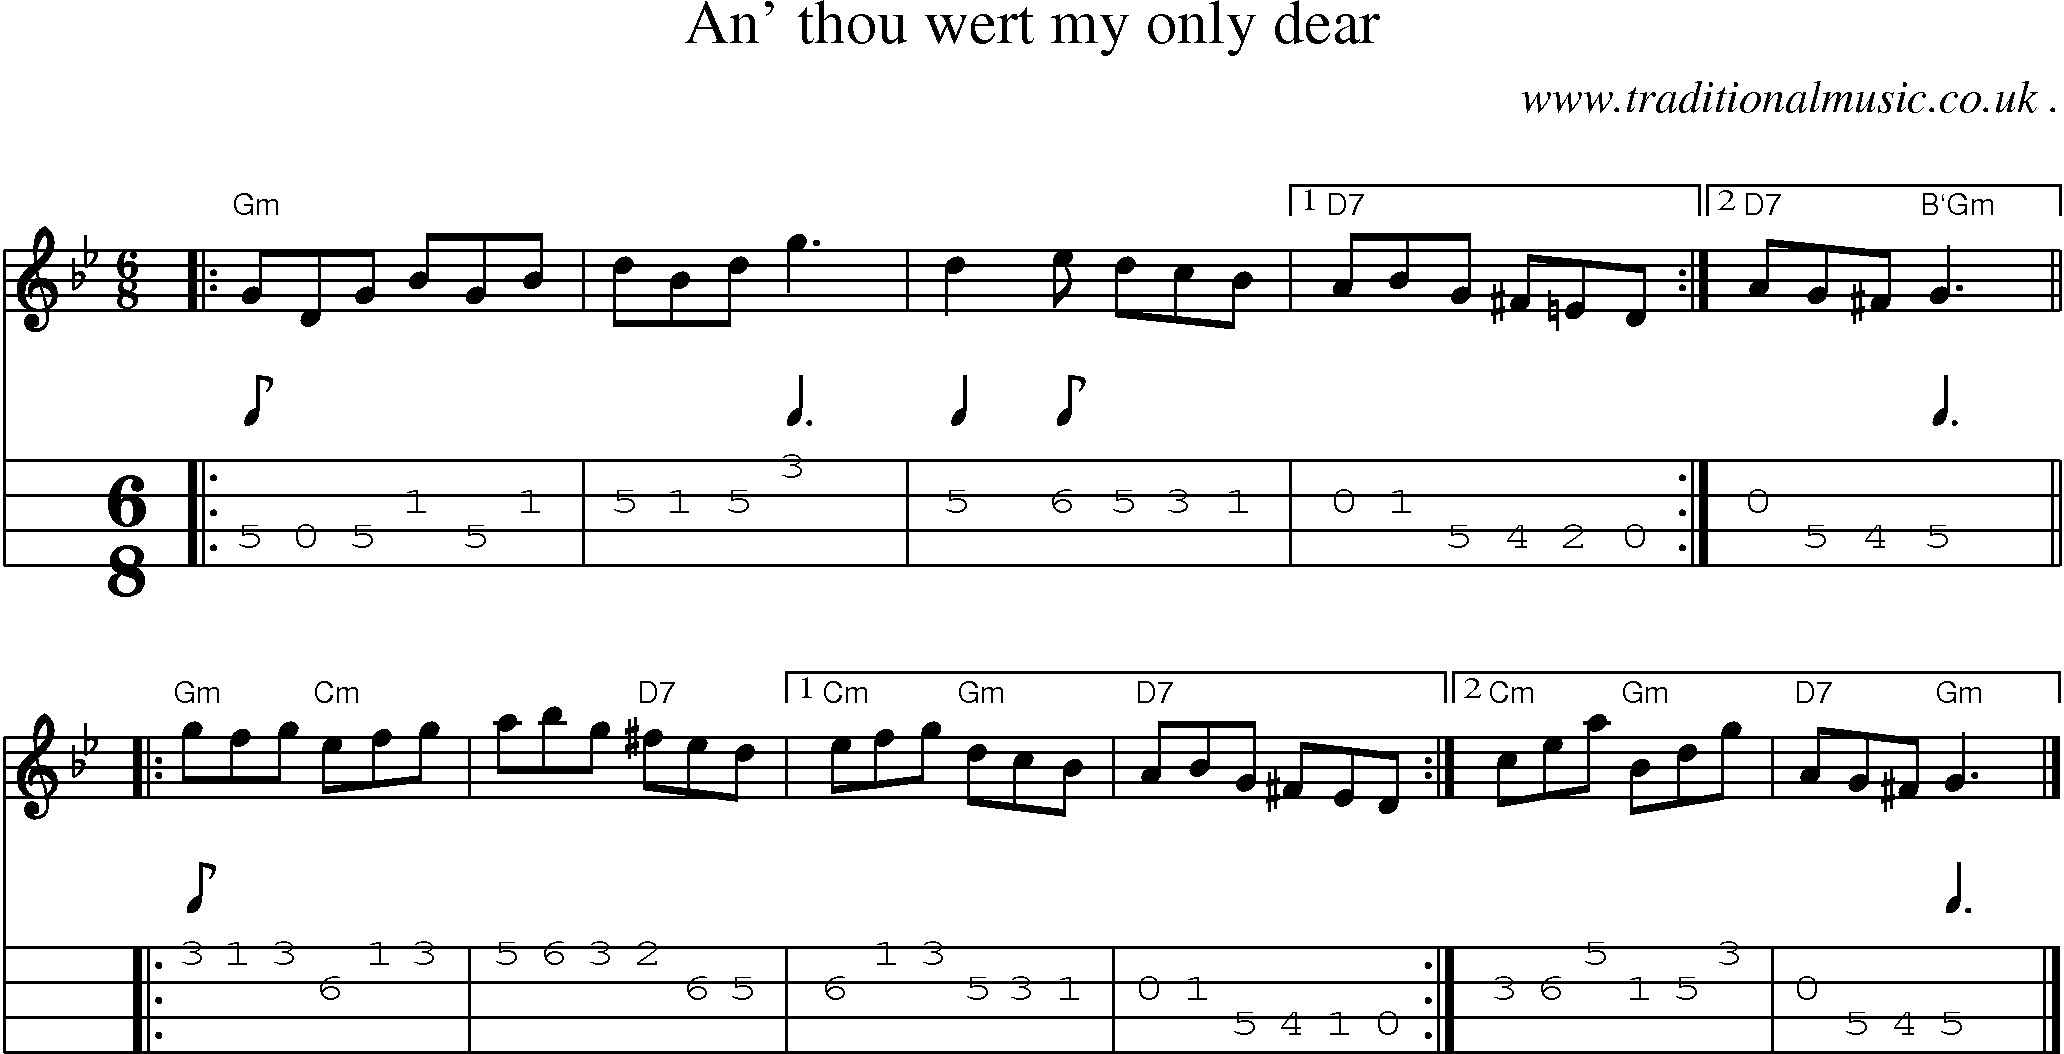 Sheet-music  score, Chords and Mandolin Tabs for An Thou Wert My Only Dear